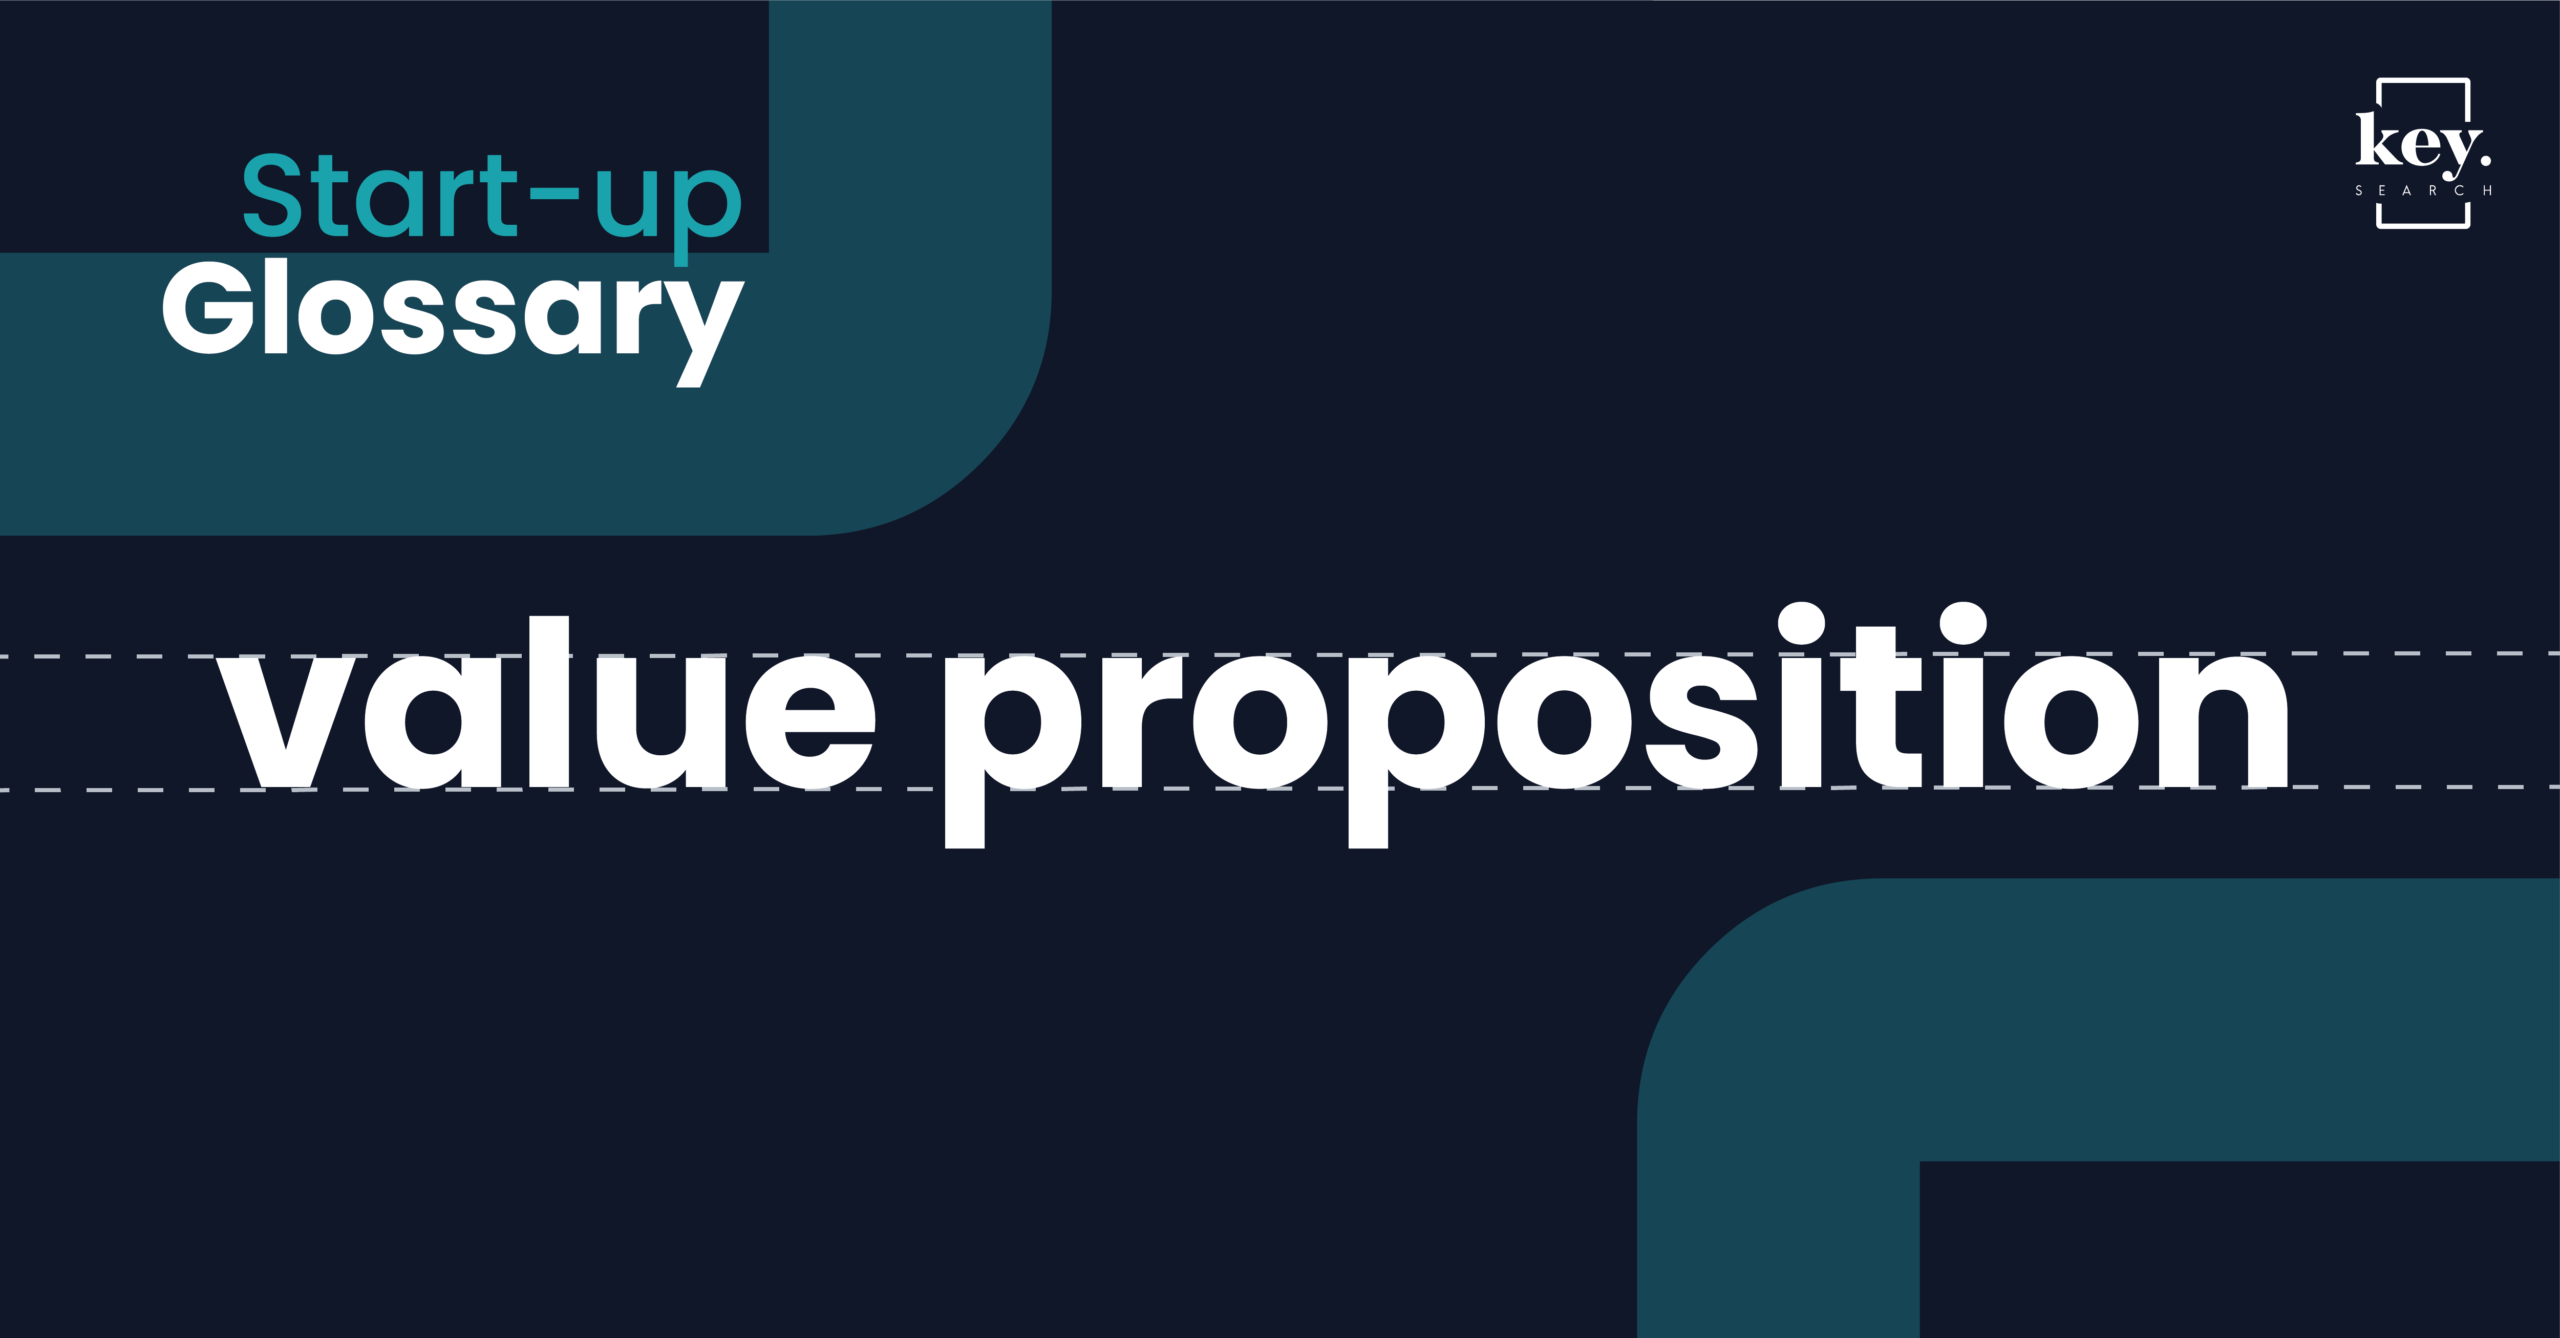 Start-up Glossary_Value proposition